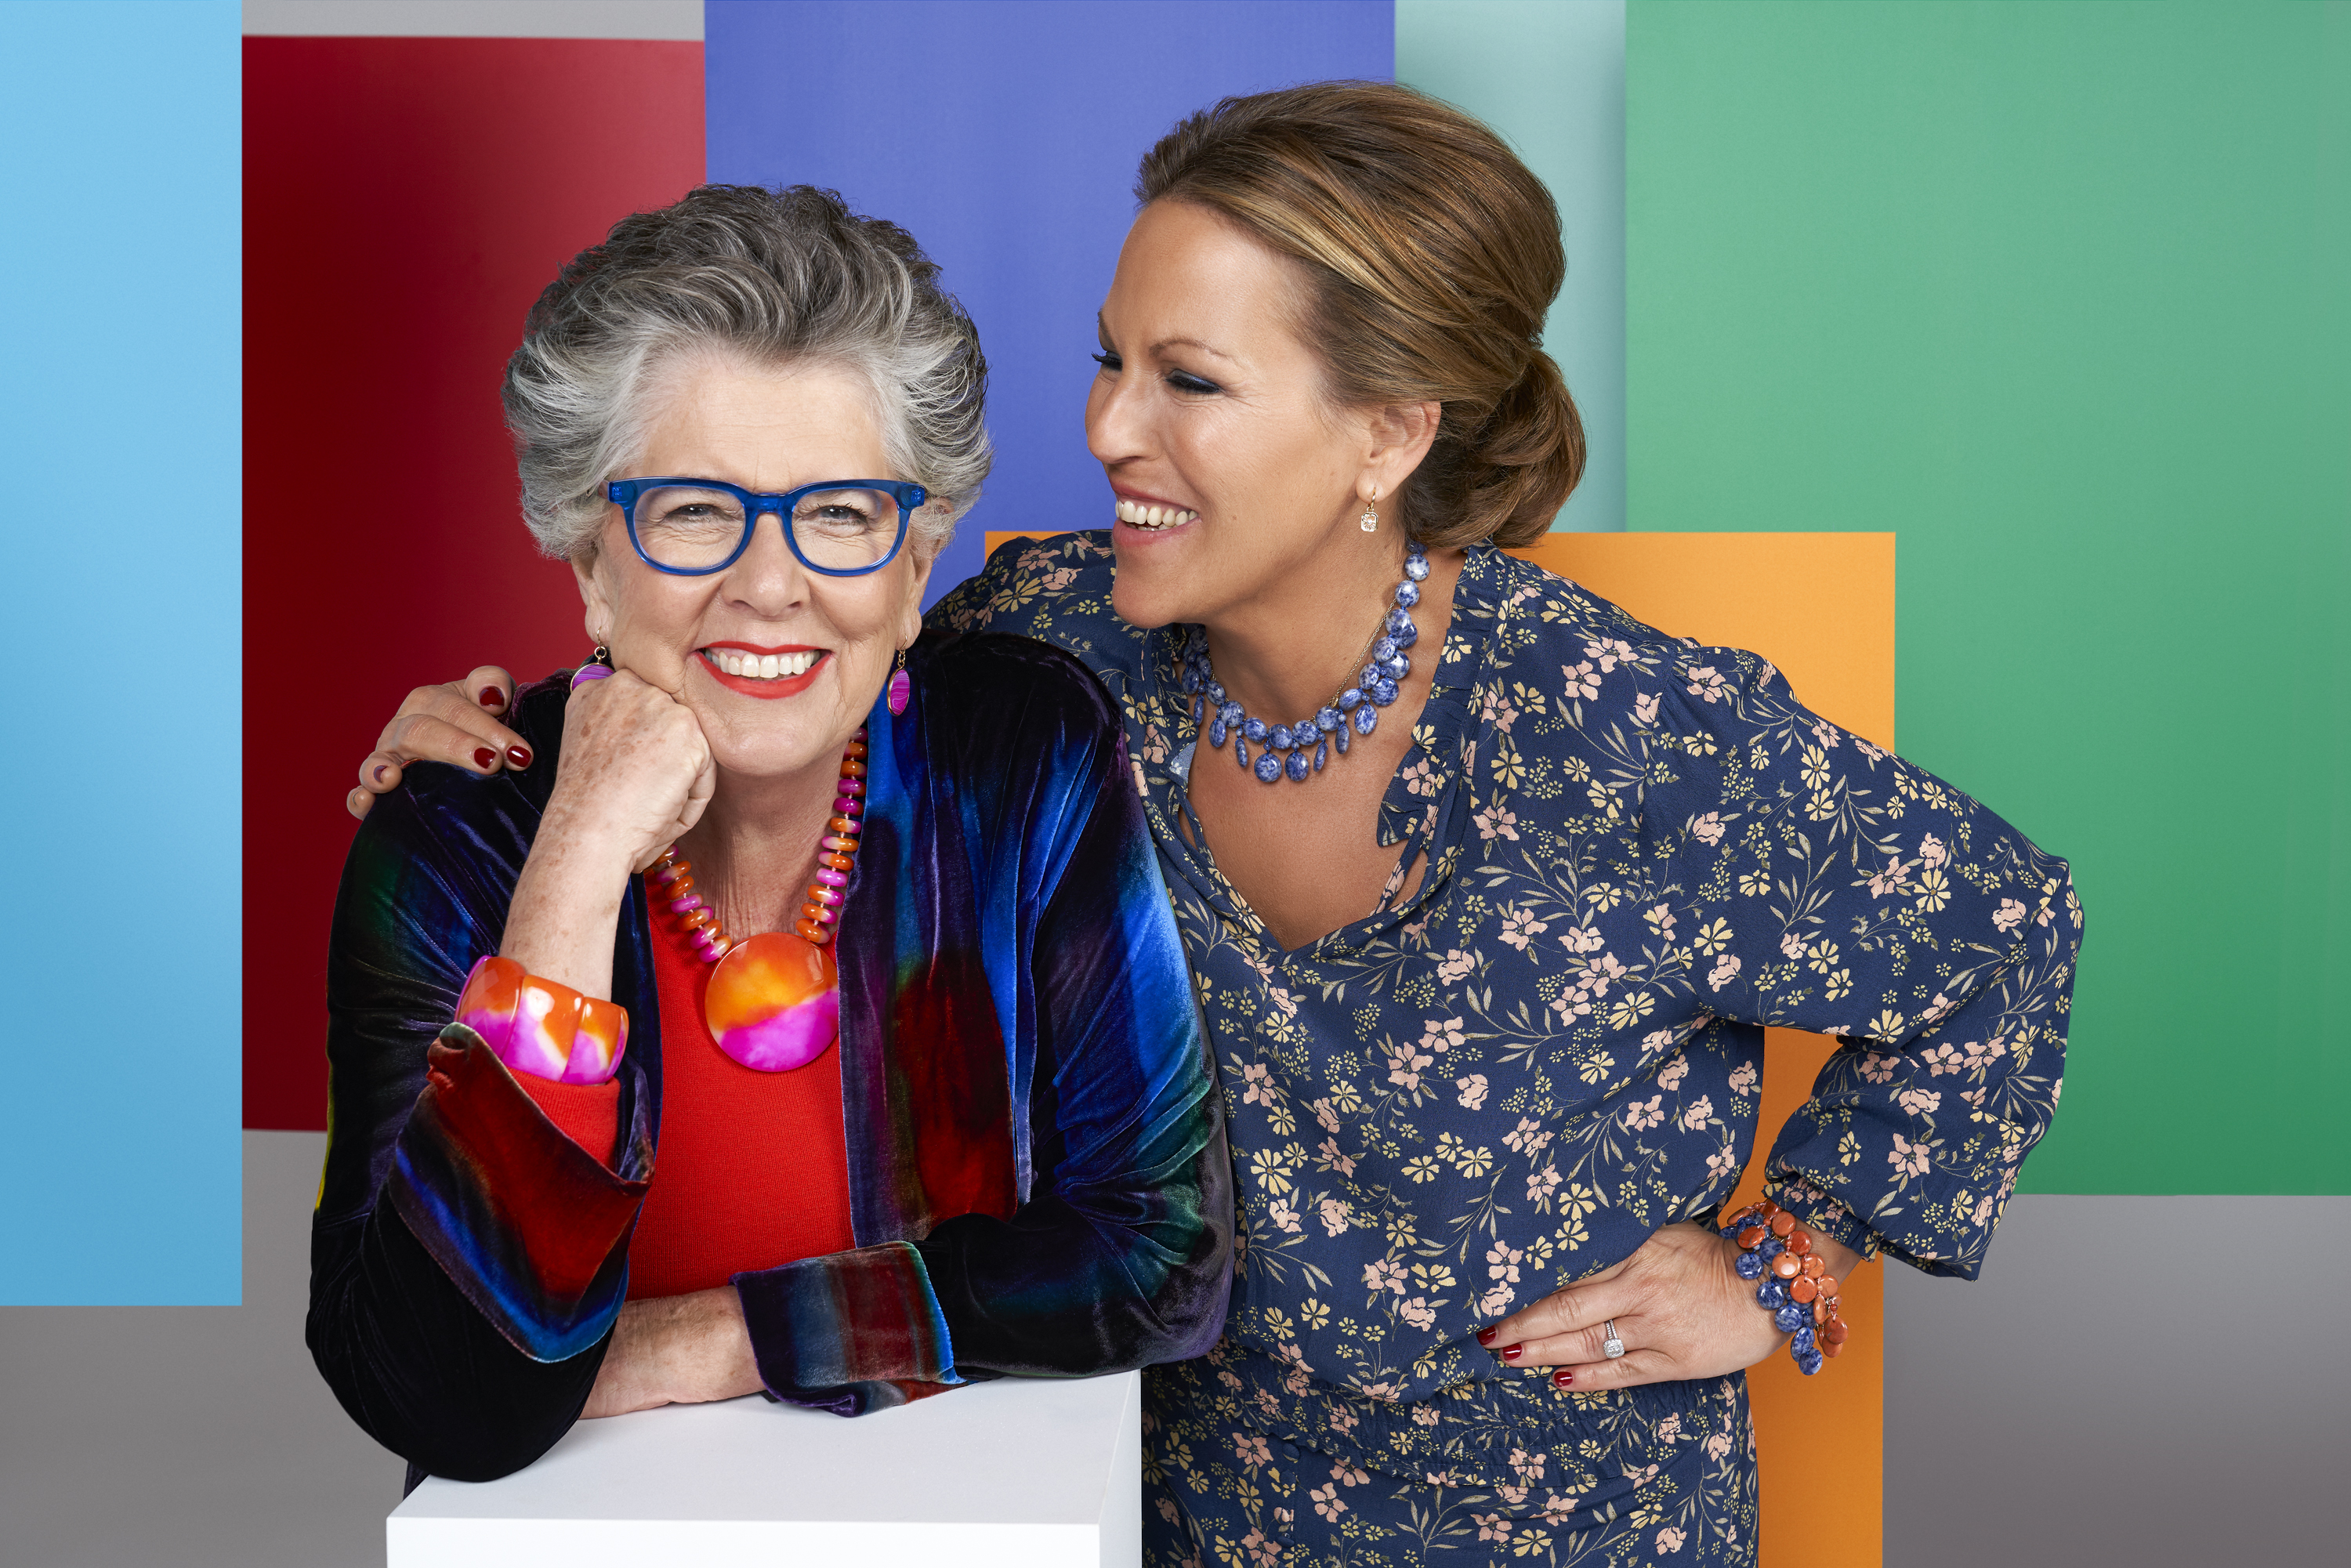 Prue Leith and Nikki Gewirtz wearing items from the Prue X Lola Rose jewellery collection